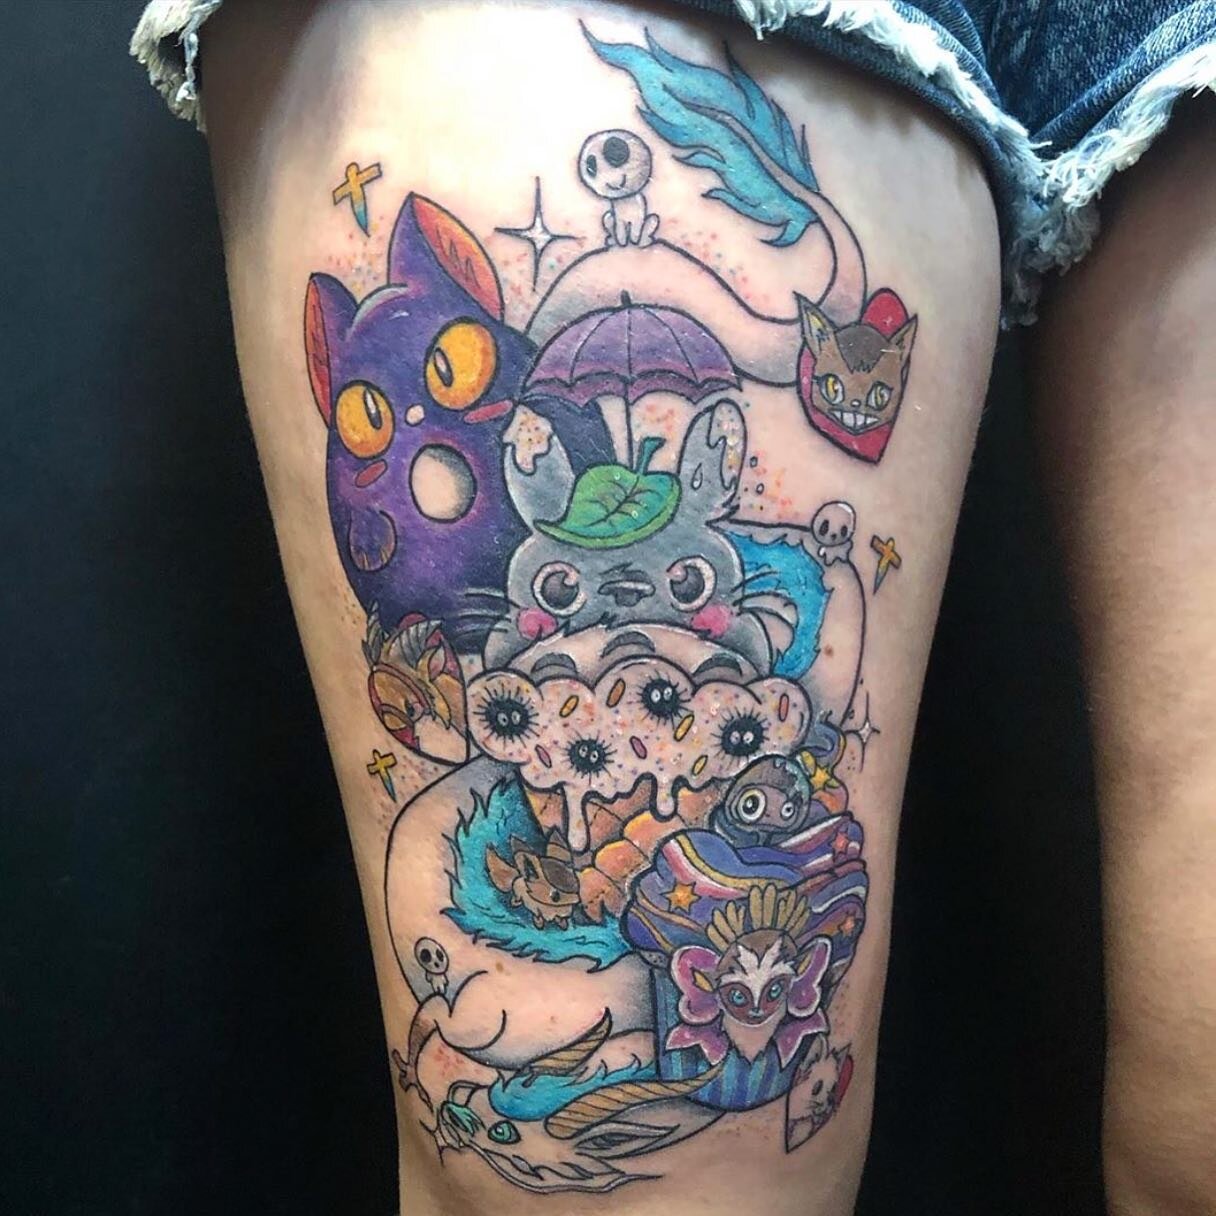 Any Studio Ghibli fans out there? This thigh was done by @kaitlynteressa